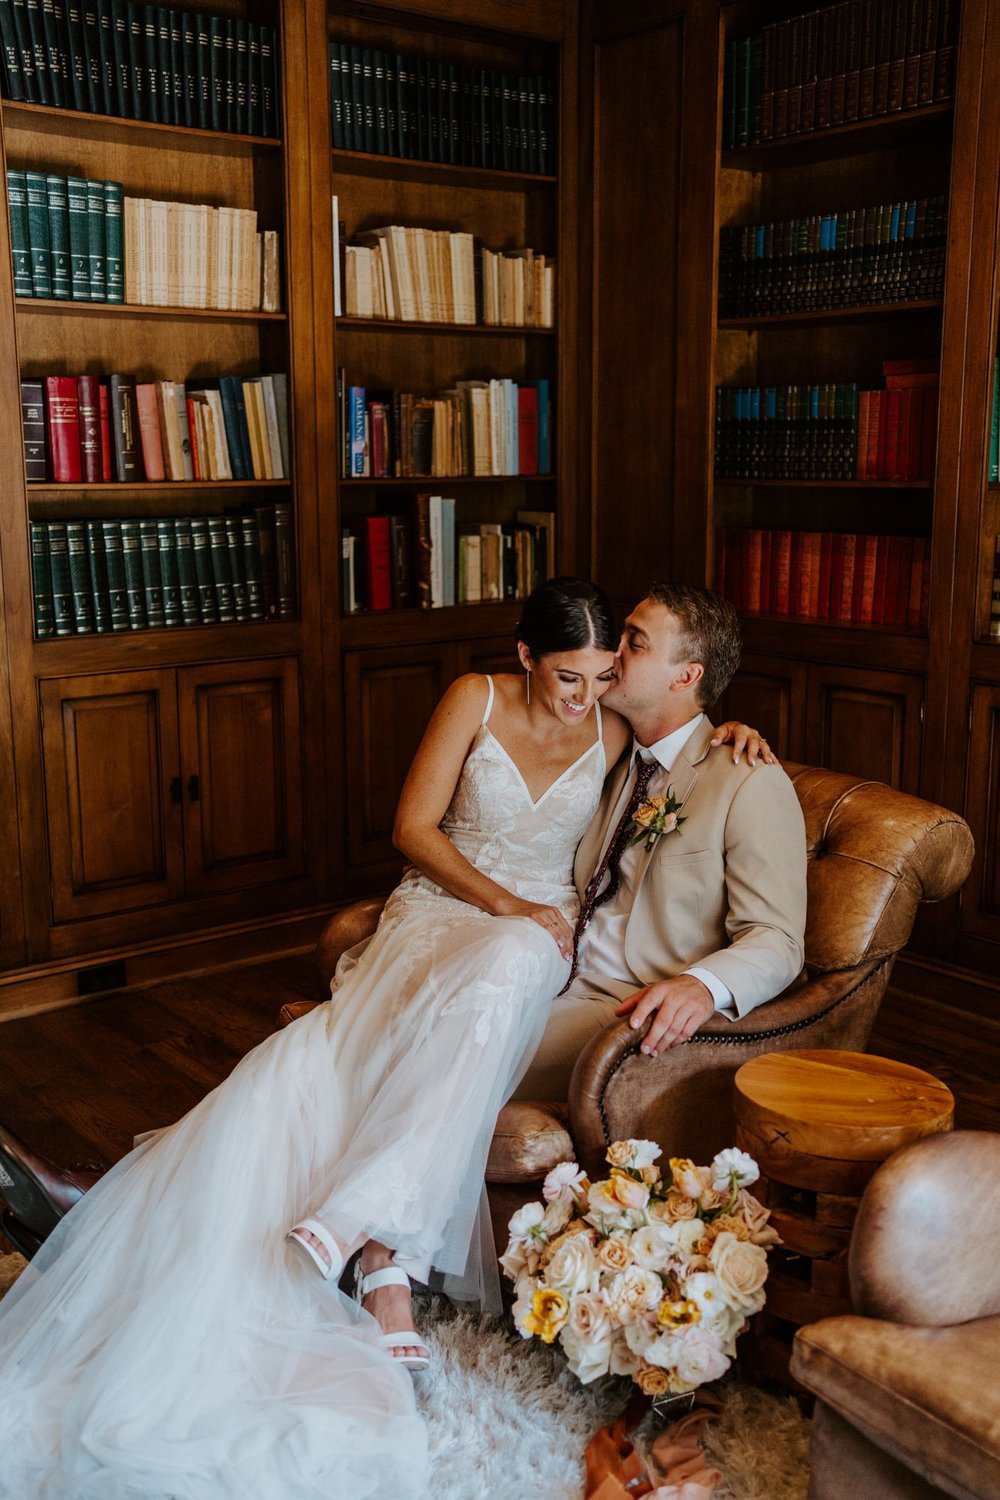 Bride and groom romantic couples photos in library at Castle in the Forest in lake arrowhead, airbnb wedding, Photo by Tida Svy